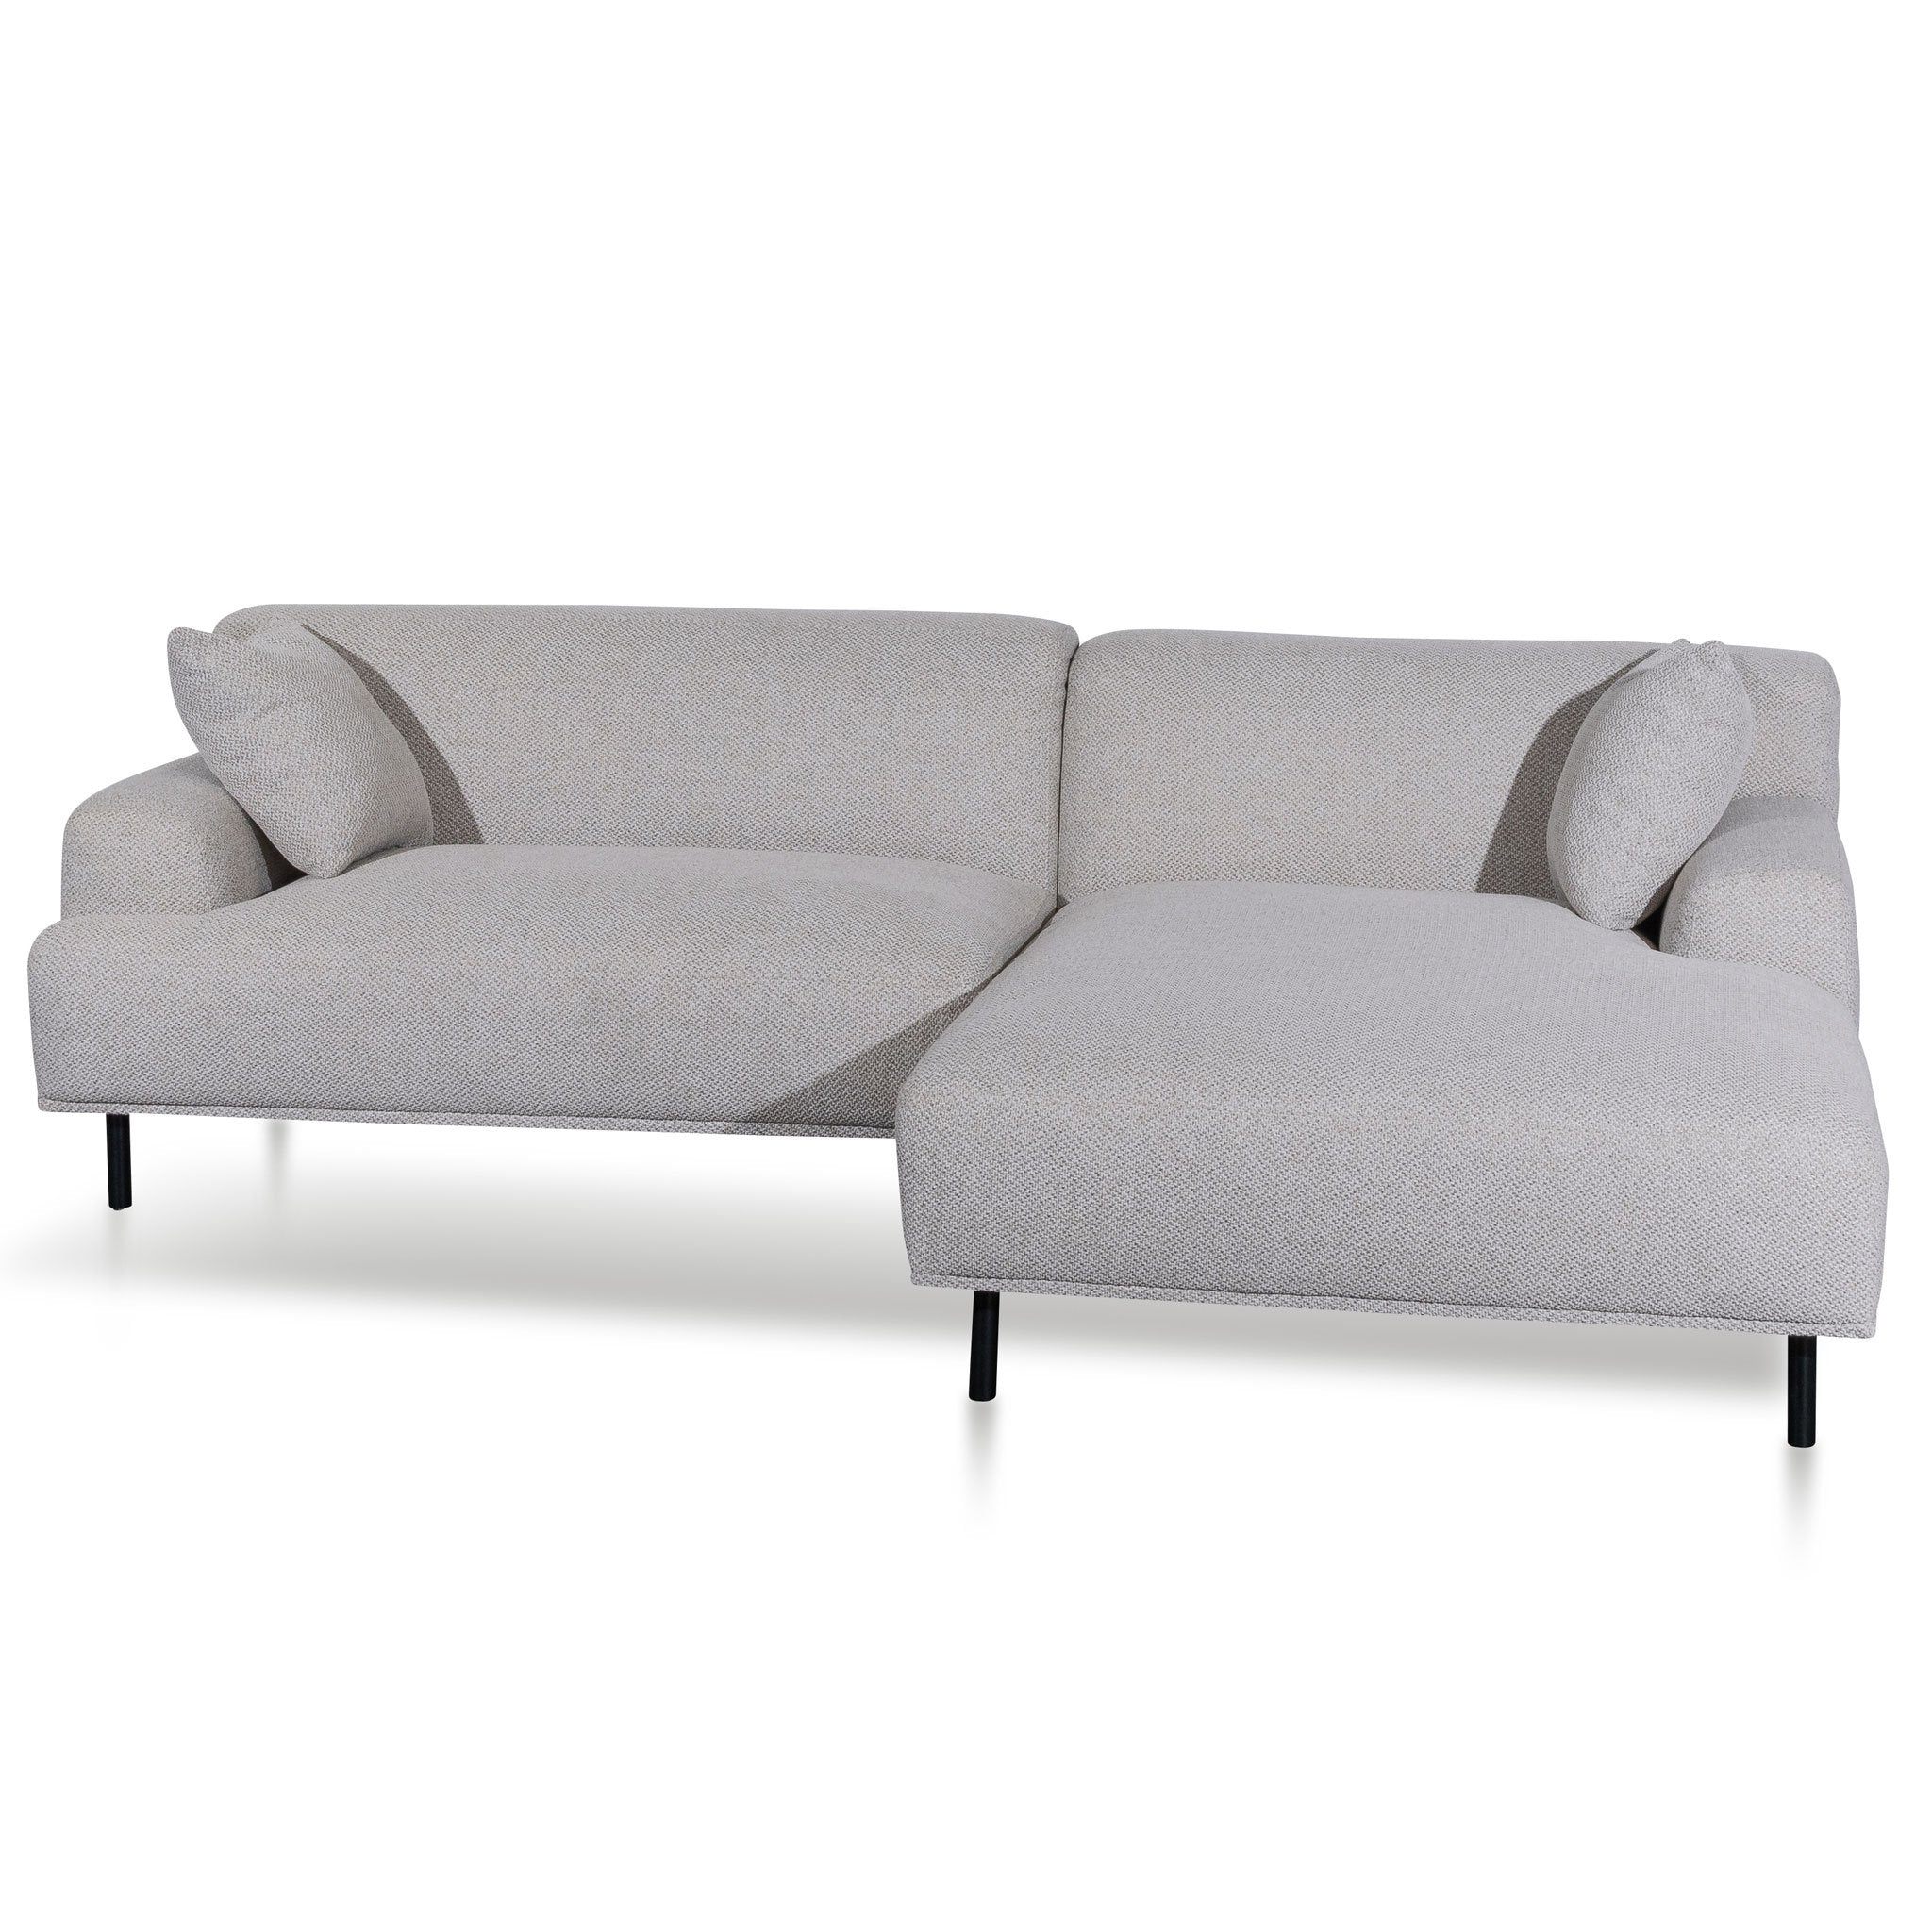 Julia Right Chaise Sofa - Sterling Sand - Sofas